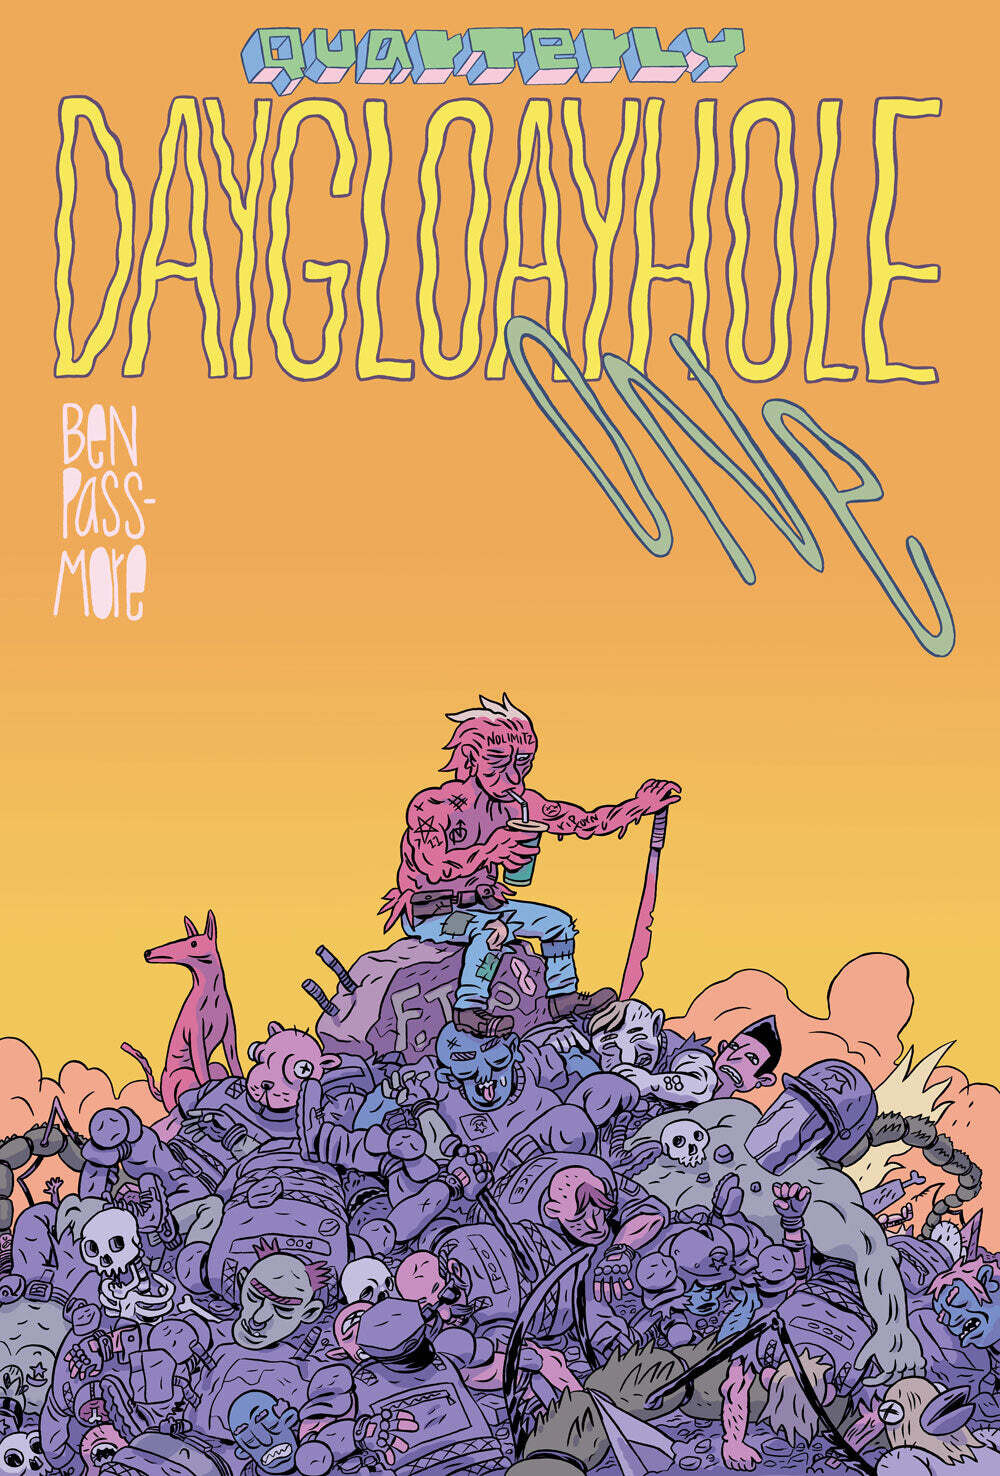 DAYGLOAYHOLE - Comic by Ben Passmore